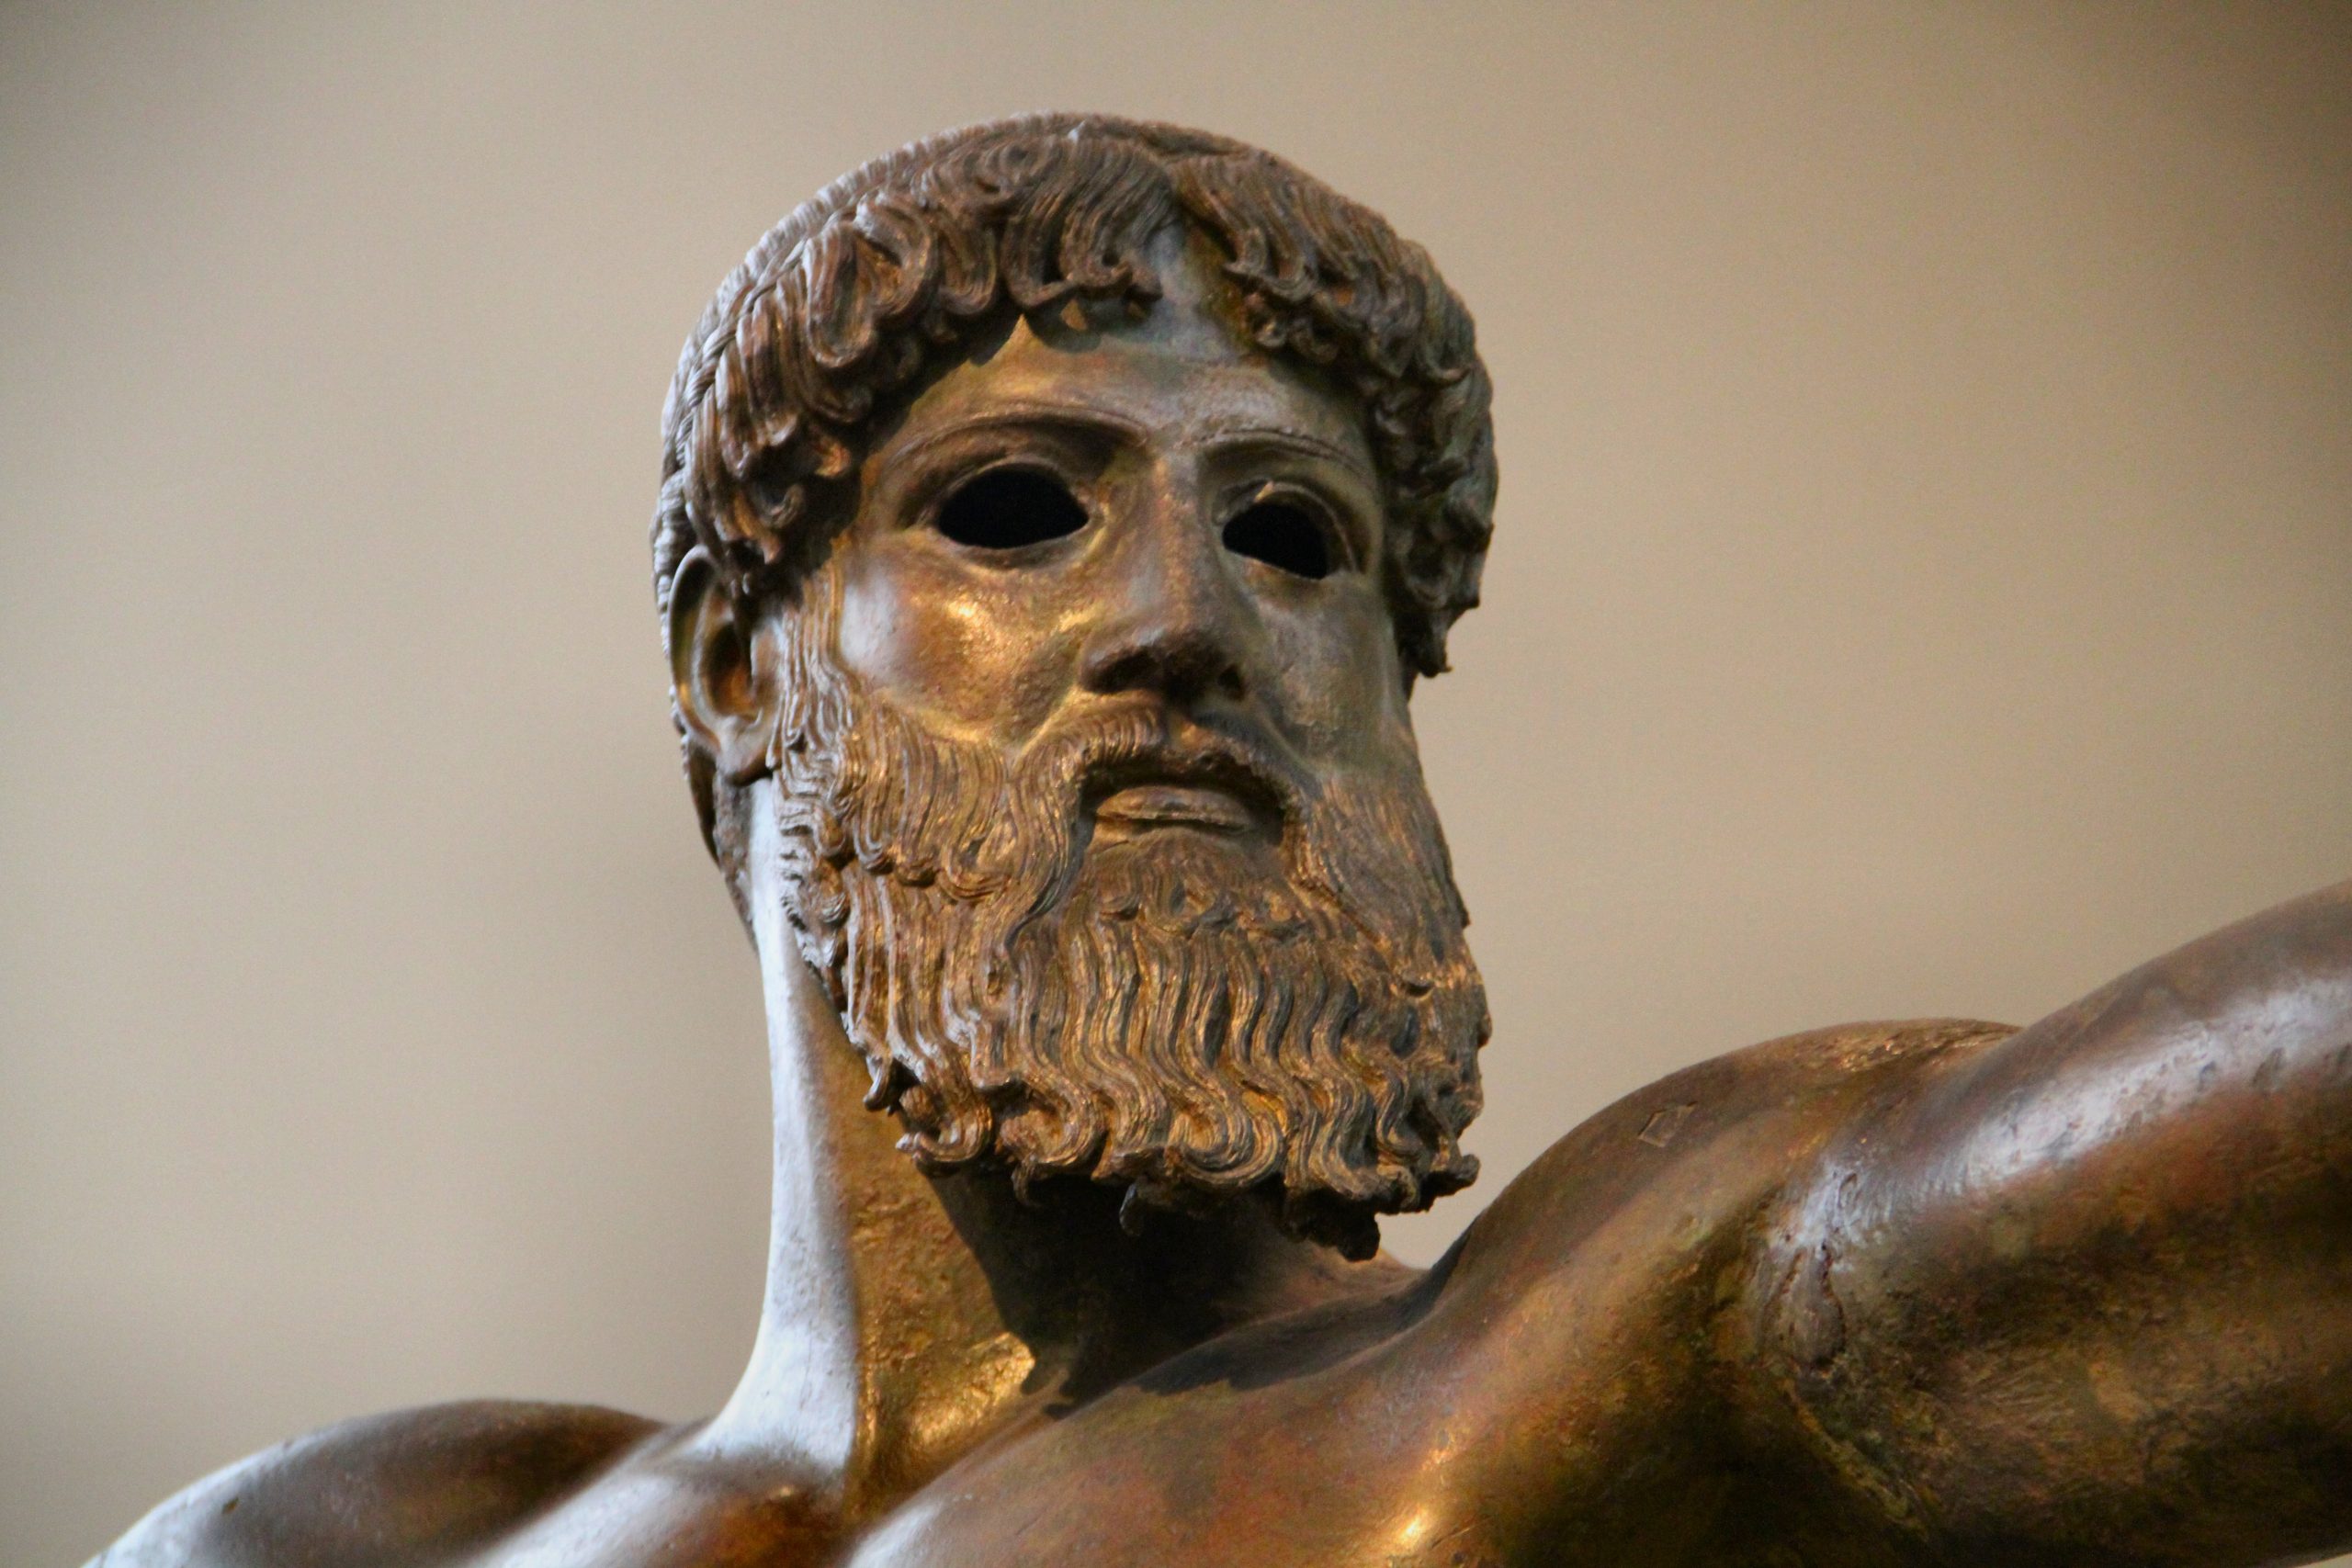 Artemision Zeus or Poseidon (Detail of Face), bronze, ca. 460 B.C.E. (National Archaeological Museum, Athens). Photo by dynamosquito, CC BY-SA 2.0.